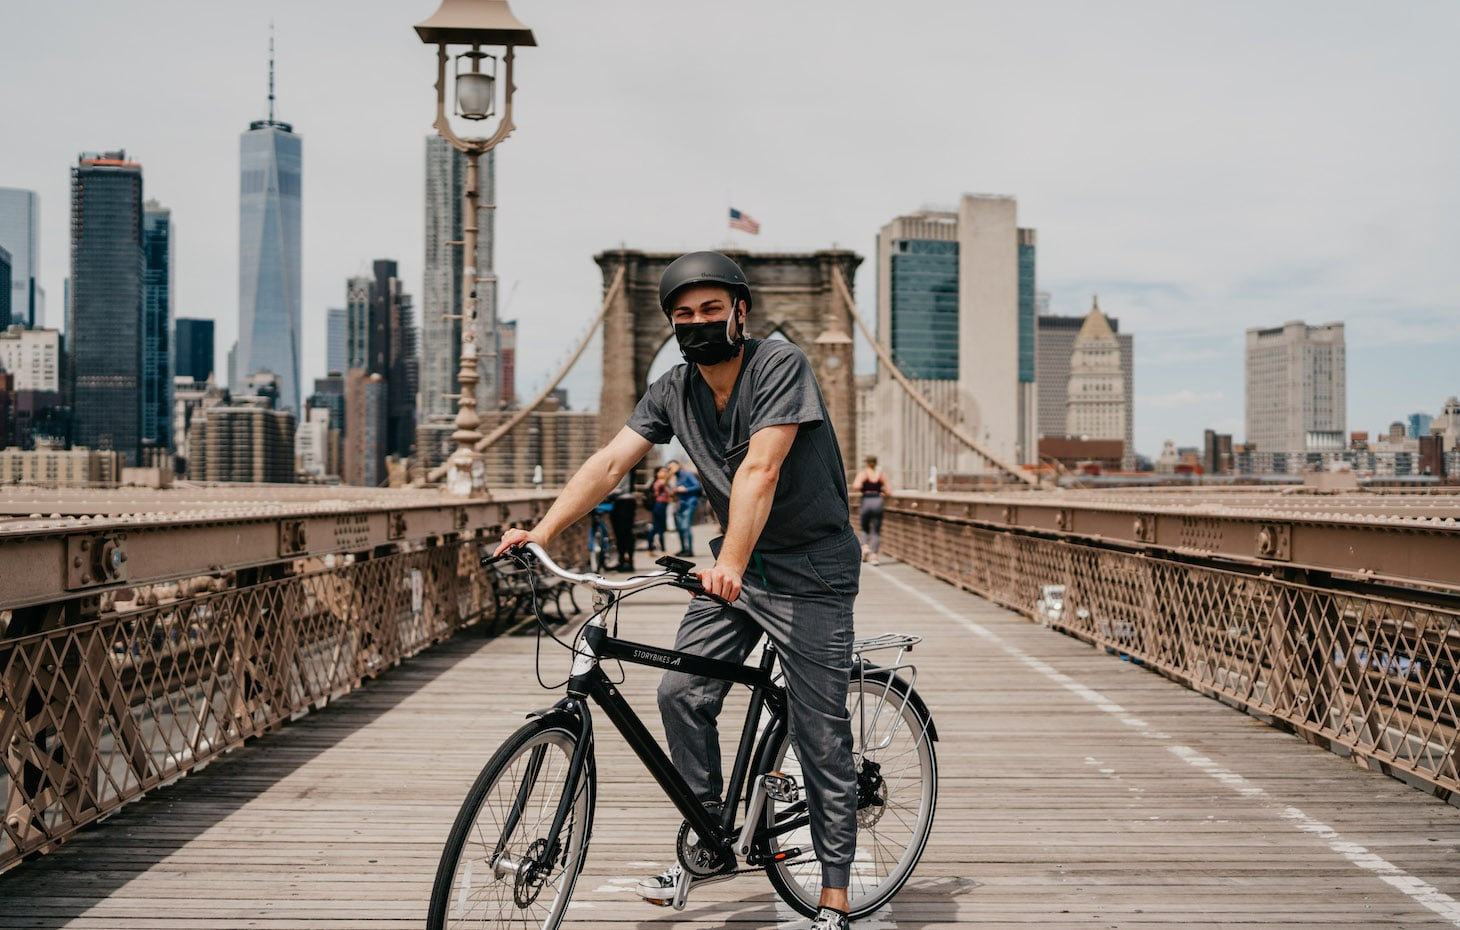 Do you need a license for an electric bike in New York?